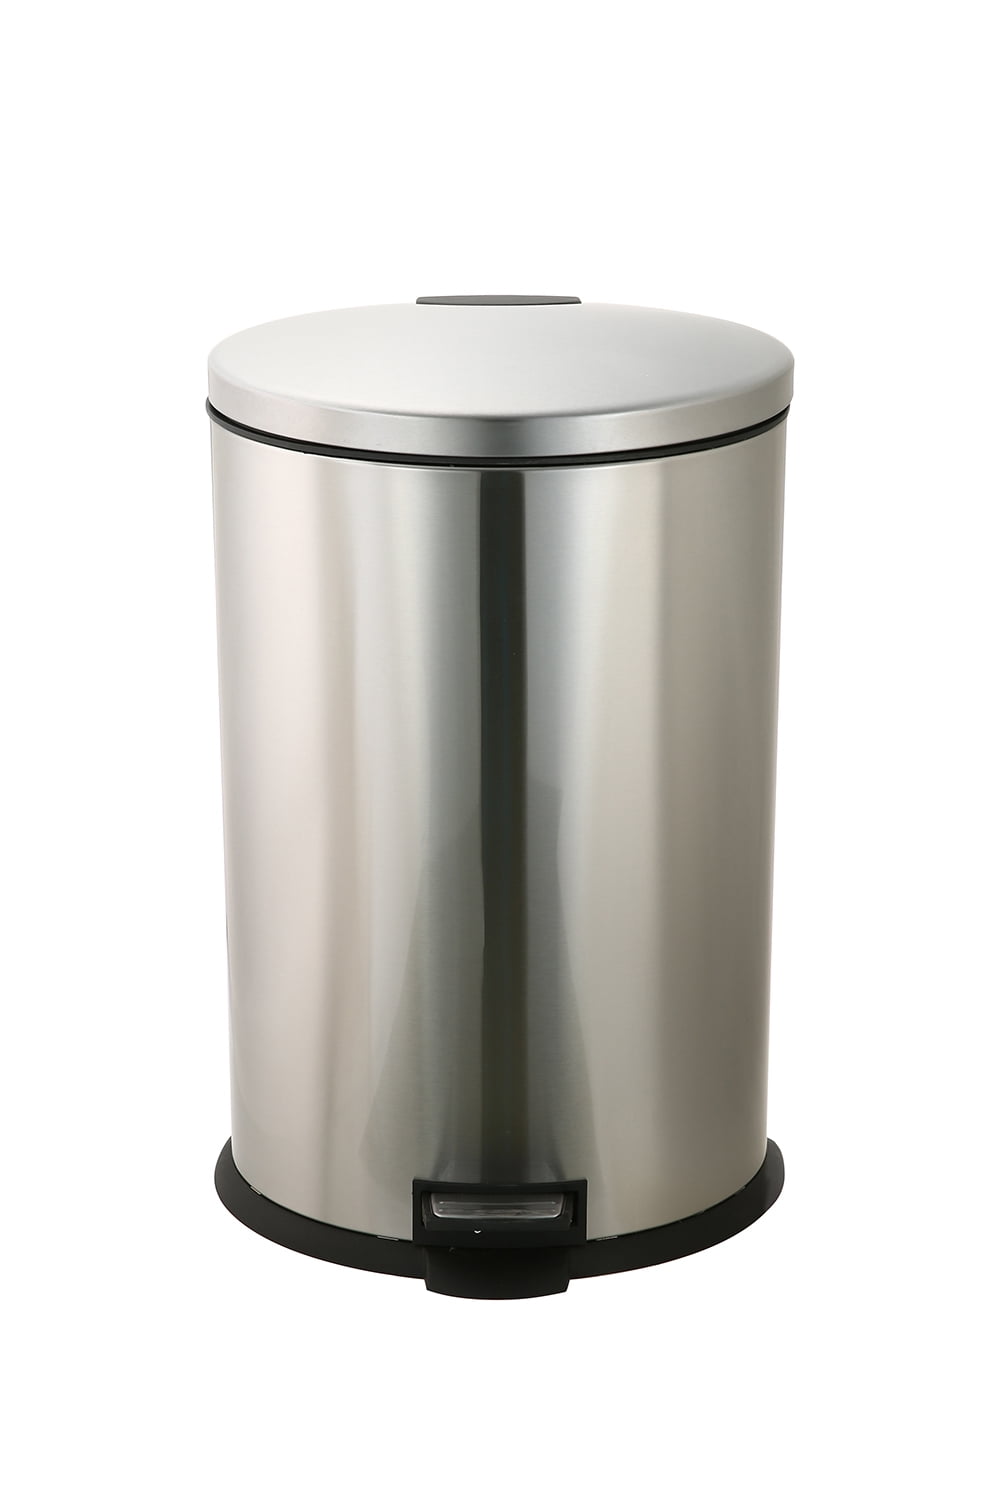 5 Liter 1.3 Gallon Small Round Silver Stainless Steel Step Trash Can Wastebasket 